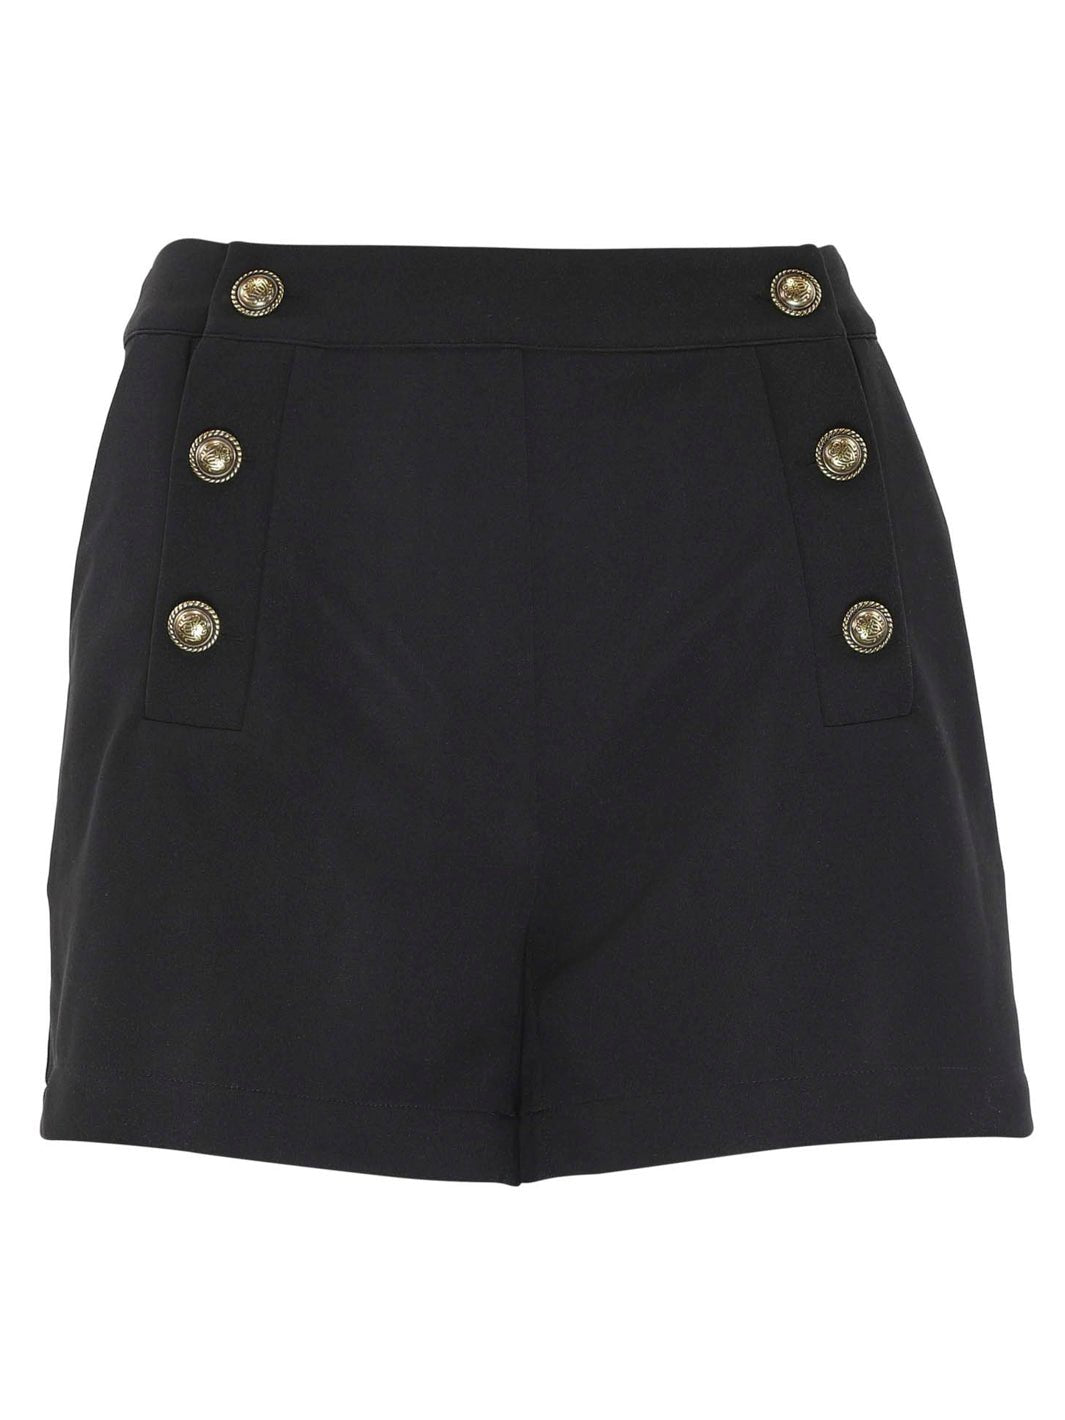 Continue Gabby shorts black - Online-Mode